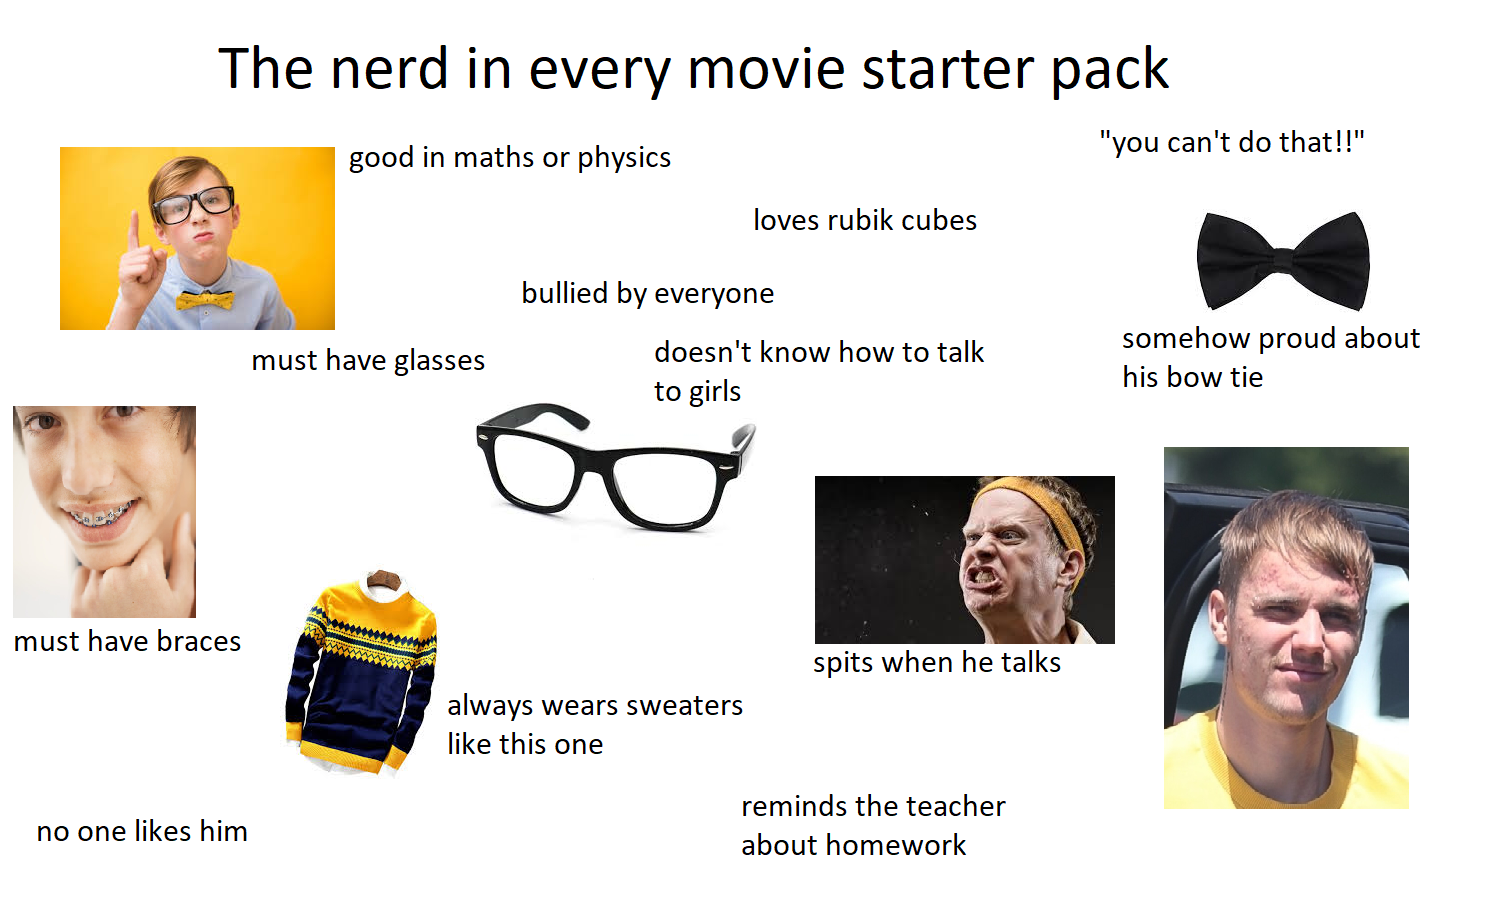 Movie memes - every movie starter pack - The nerd in every movie starter pack good in maths or physics must have braces no one him must have glasses bullied by everyone loves rubik cubes doesn't know how to talk to girls always wears sweaters this one spi